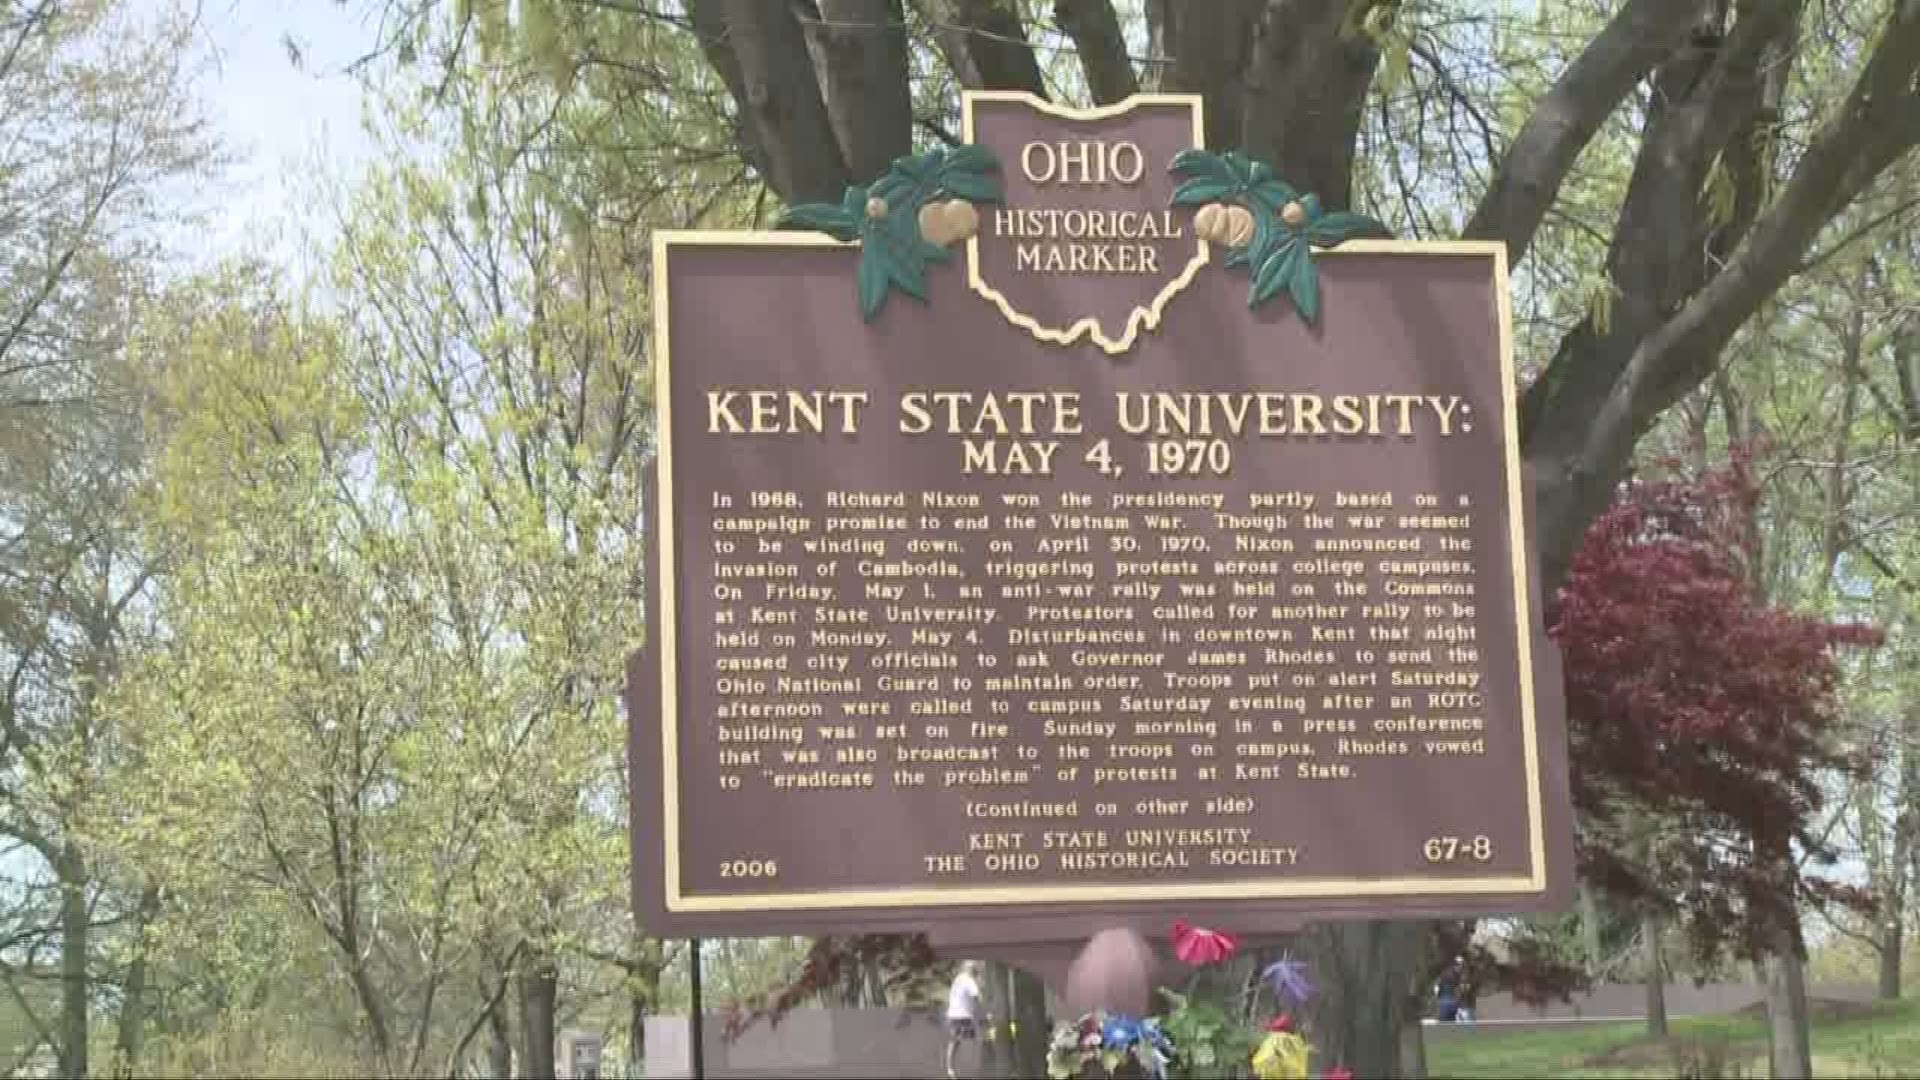 May 4, 2017: Four students were shot at killed at Kent State University on this date back in 1970.